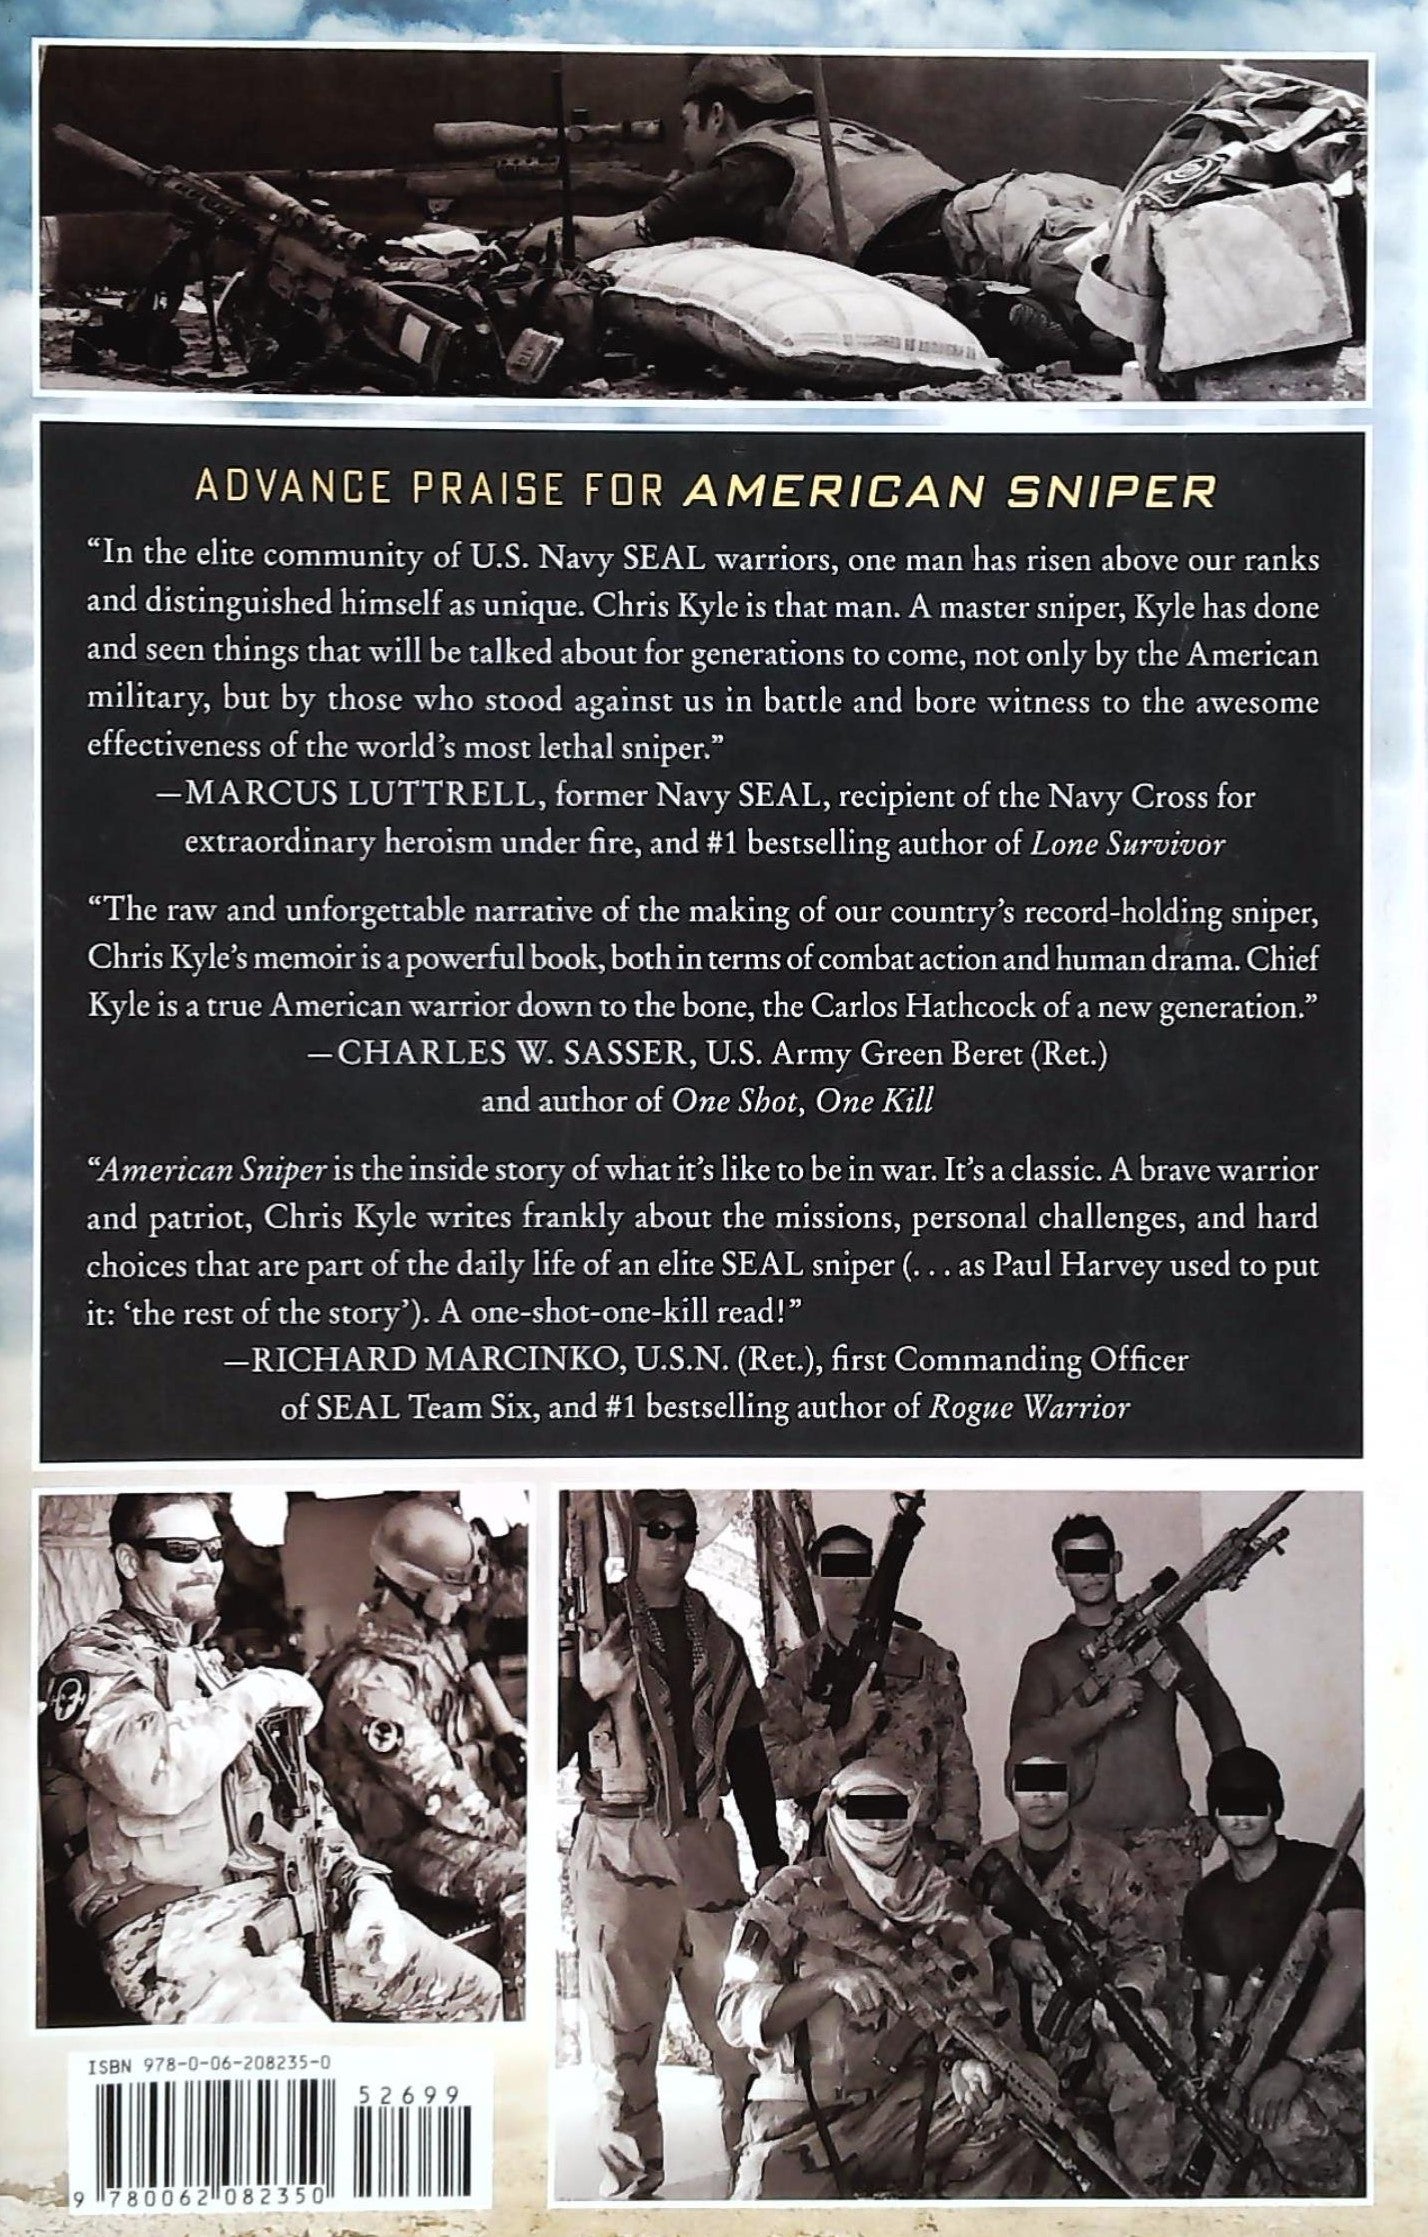 American Sniper : The Autobiography of the Most Lethal Sniper in U.S. Military History (Chris Kyle)